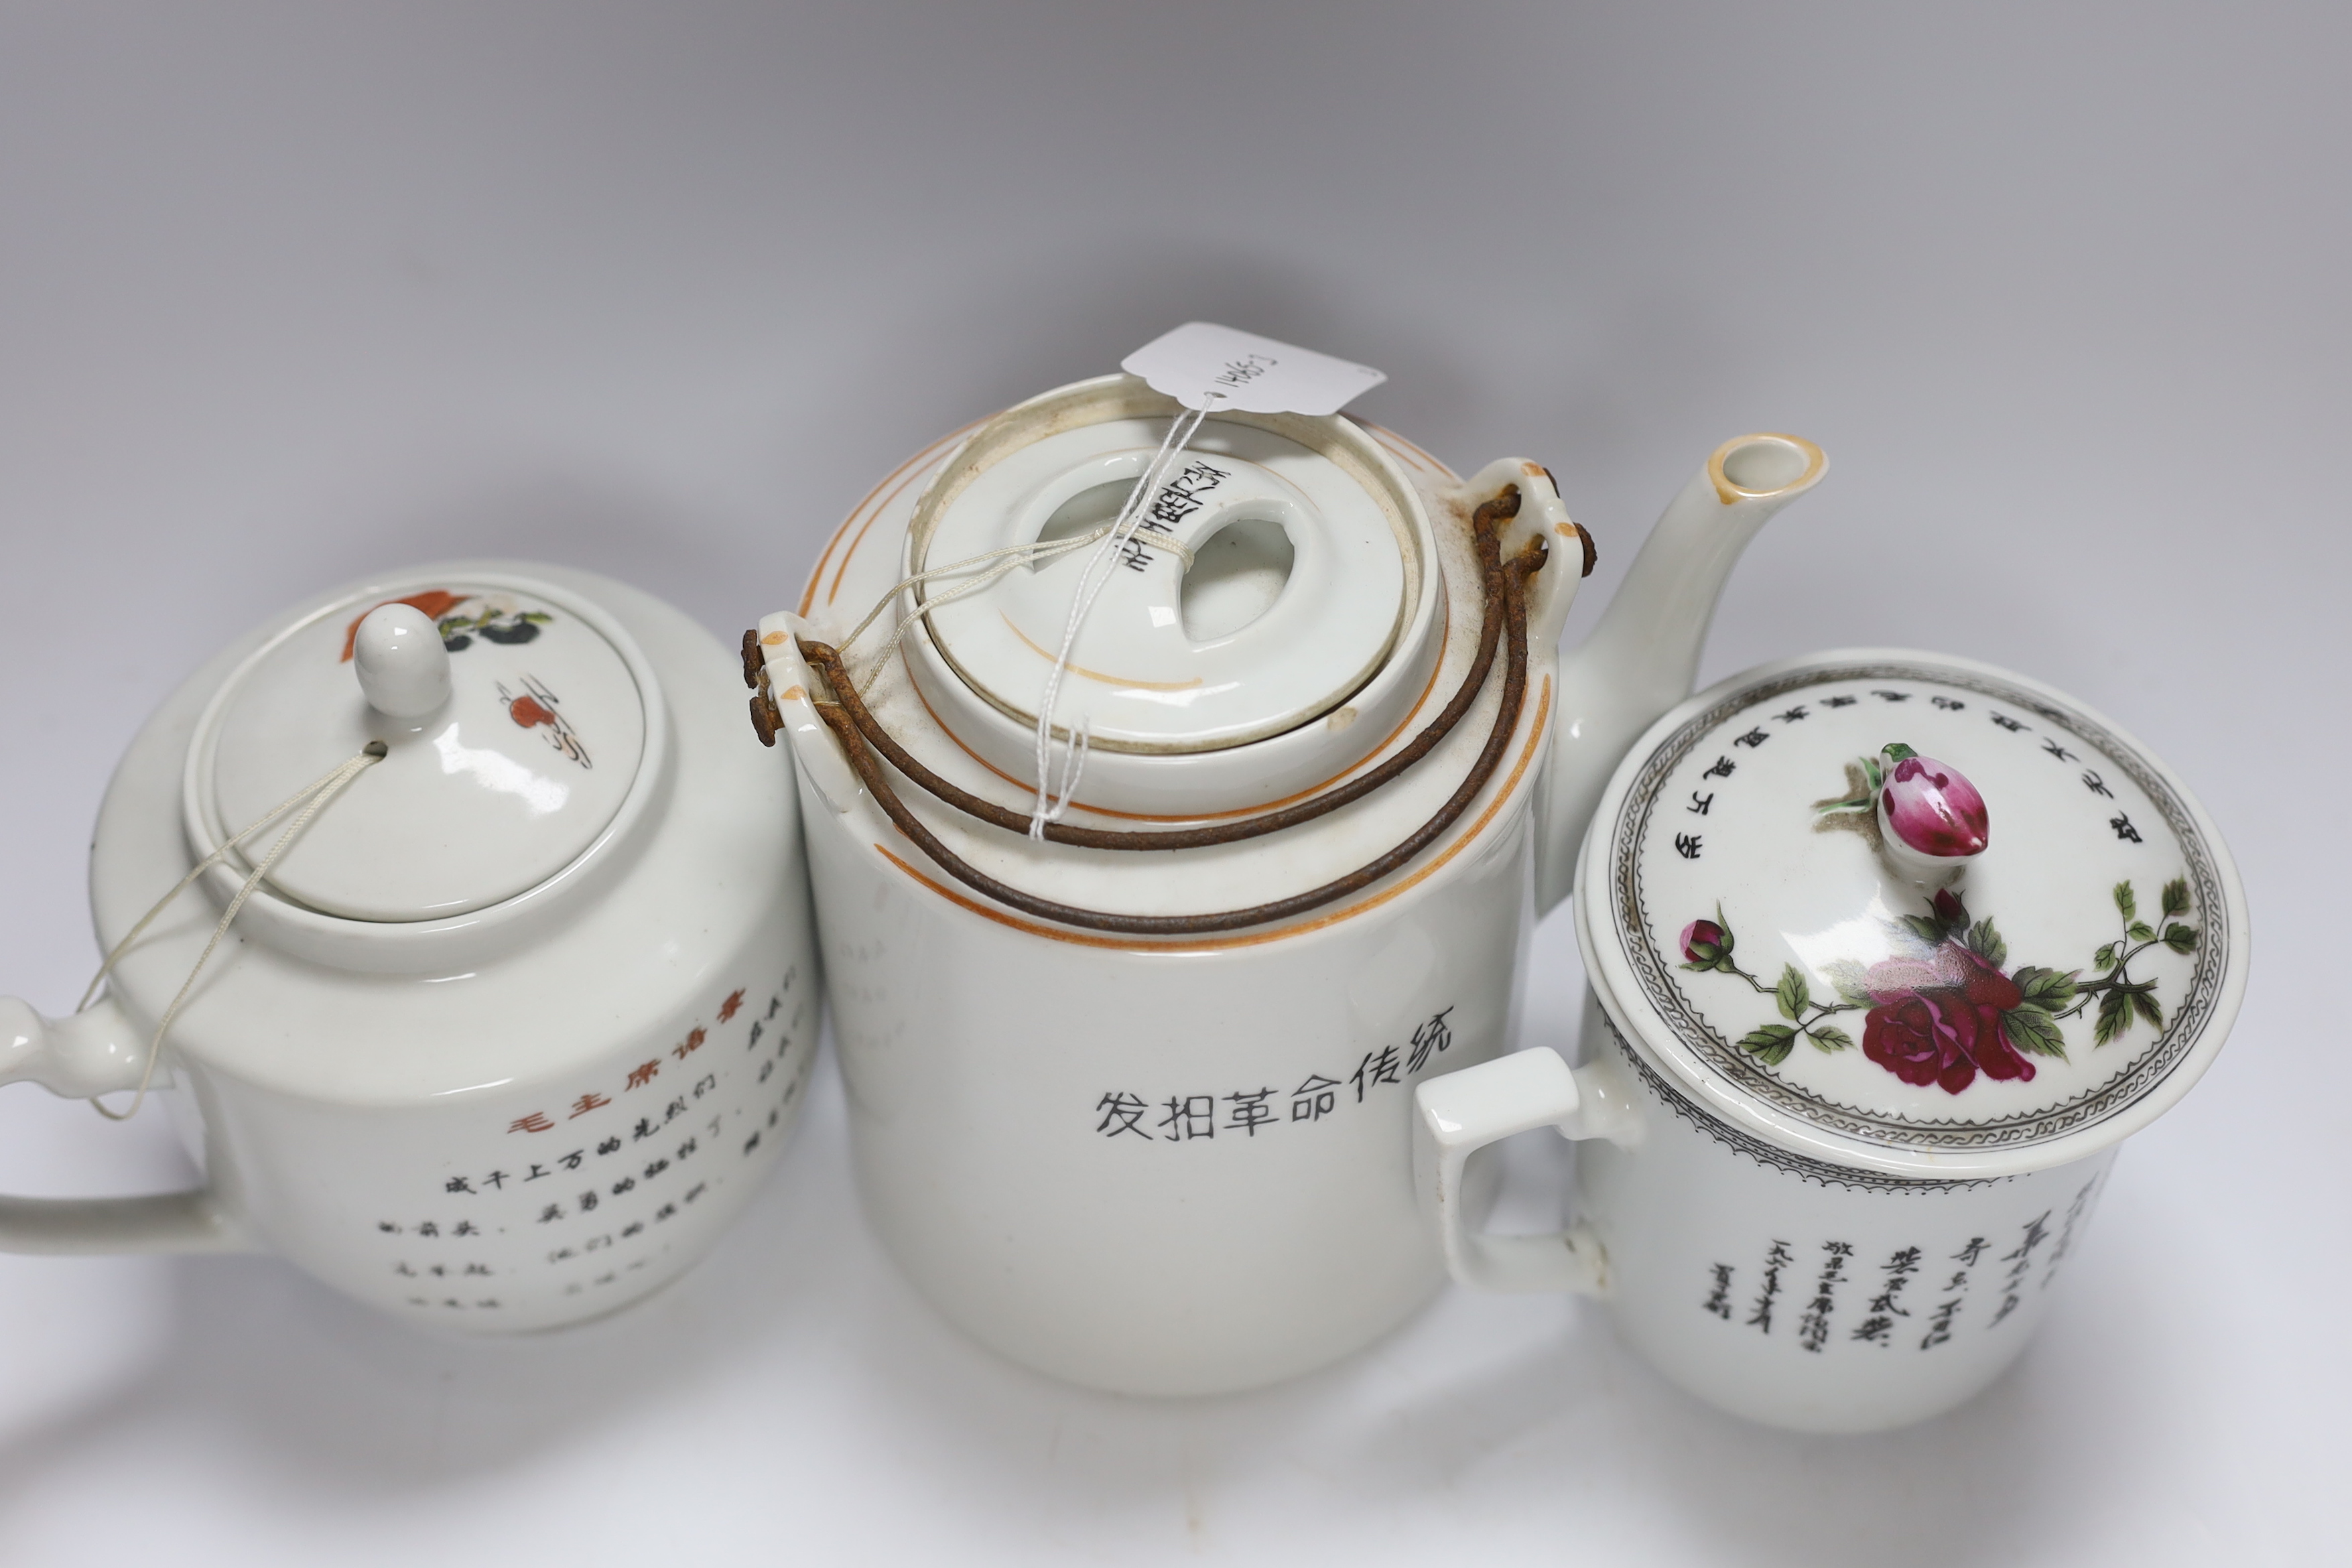 Cultural Revolution porcelain – two teapots and a pot and cover, tallest 17cm